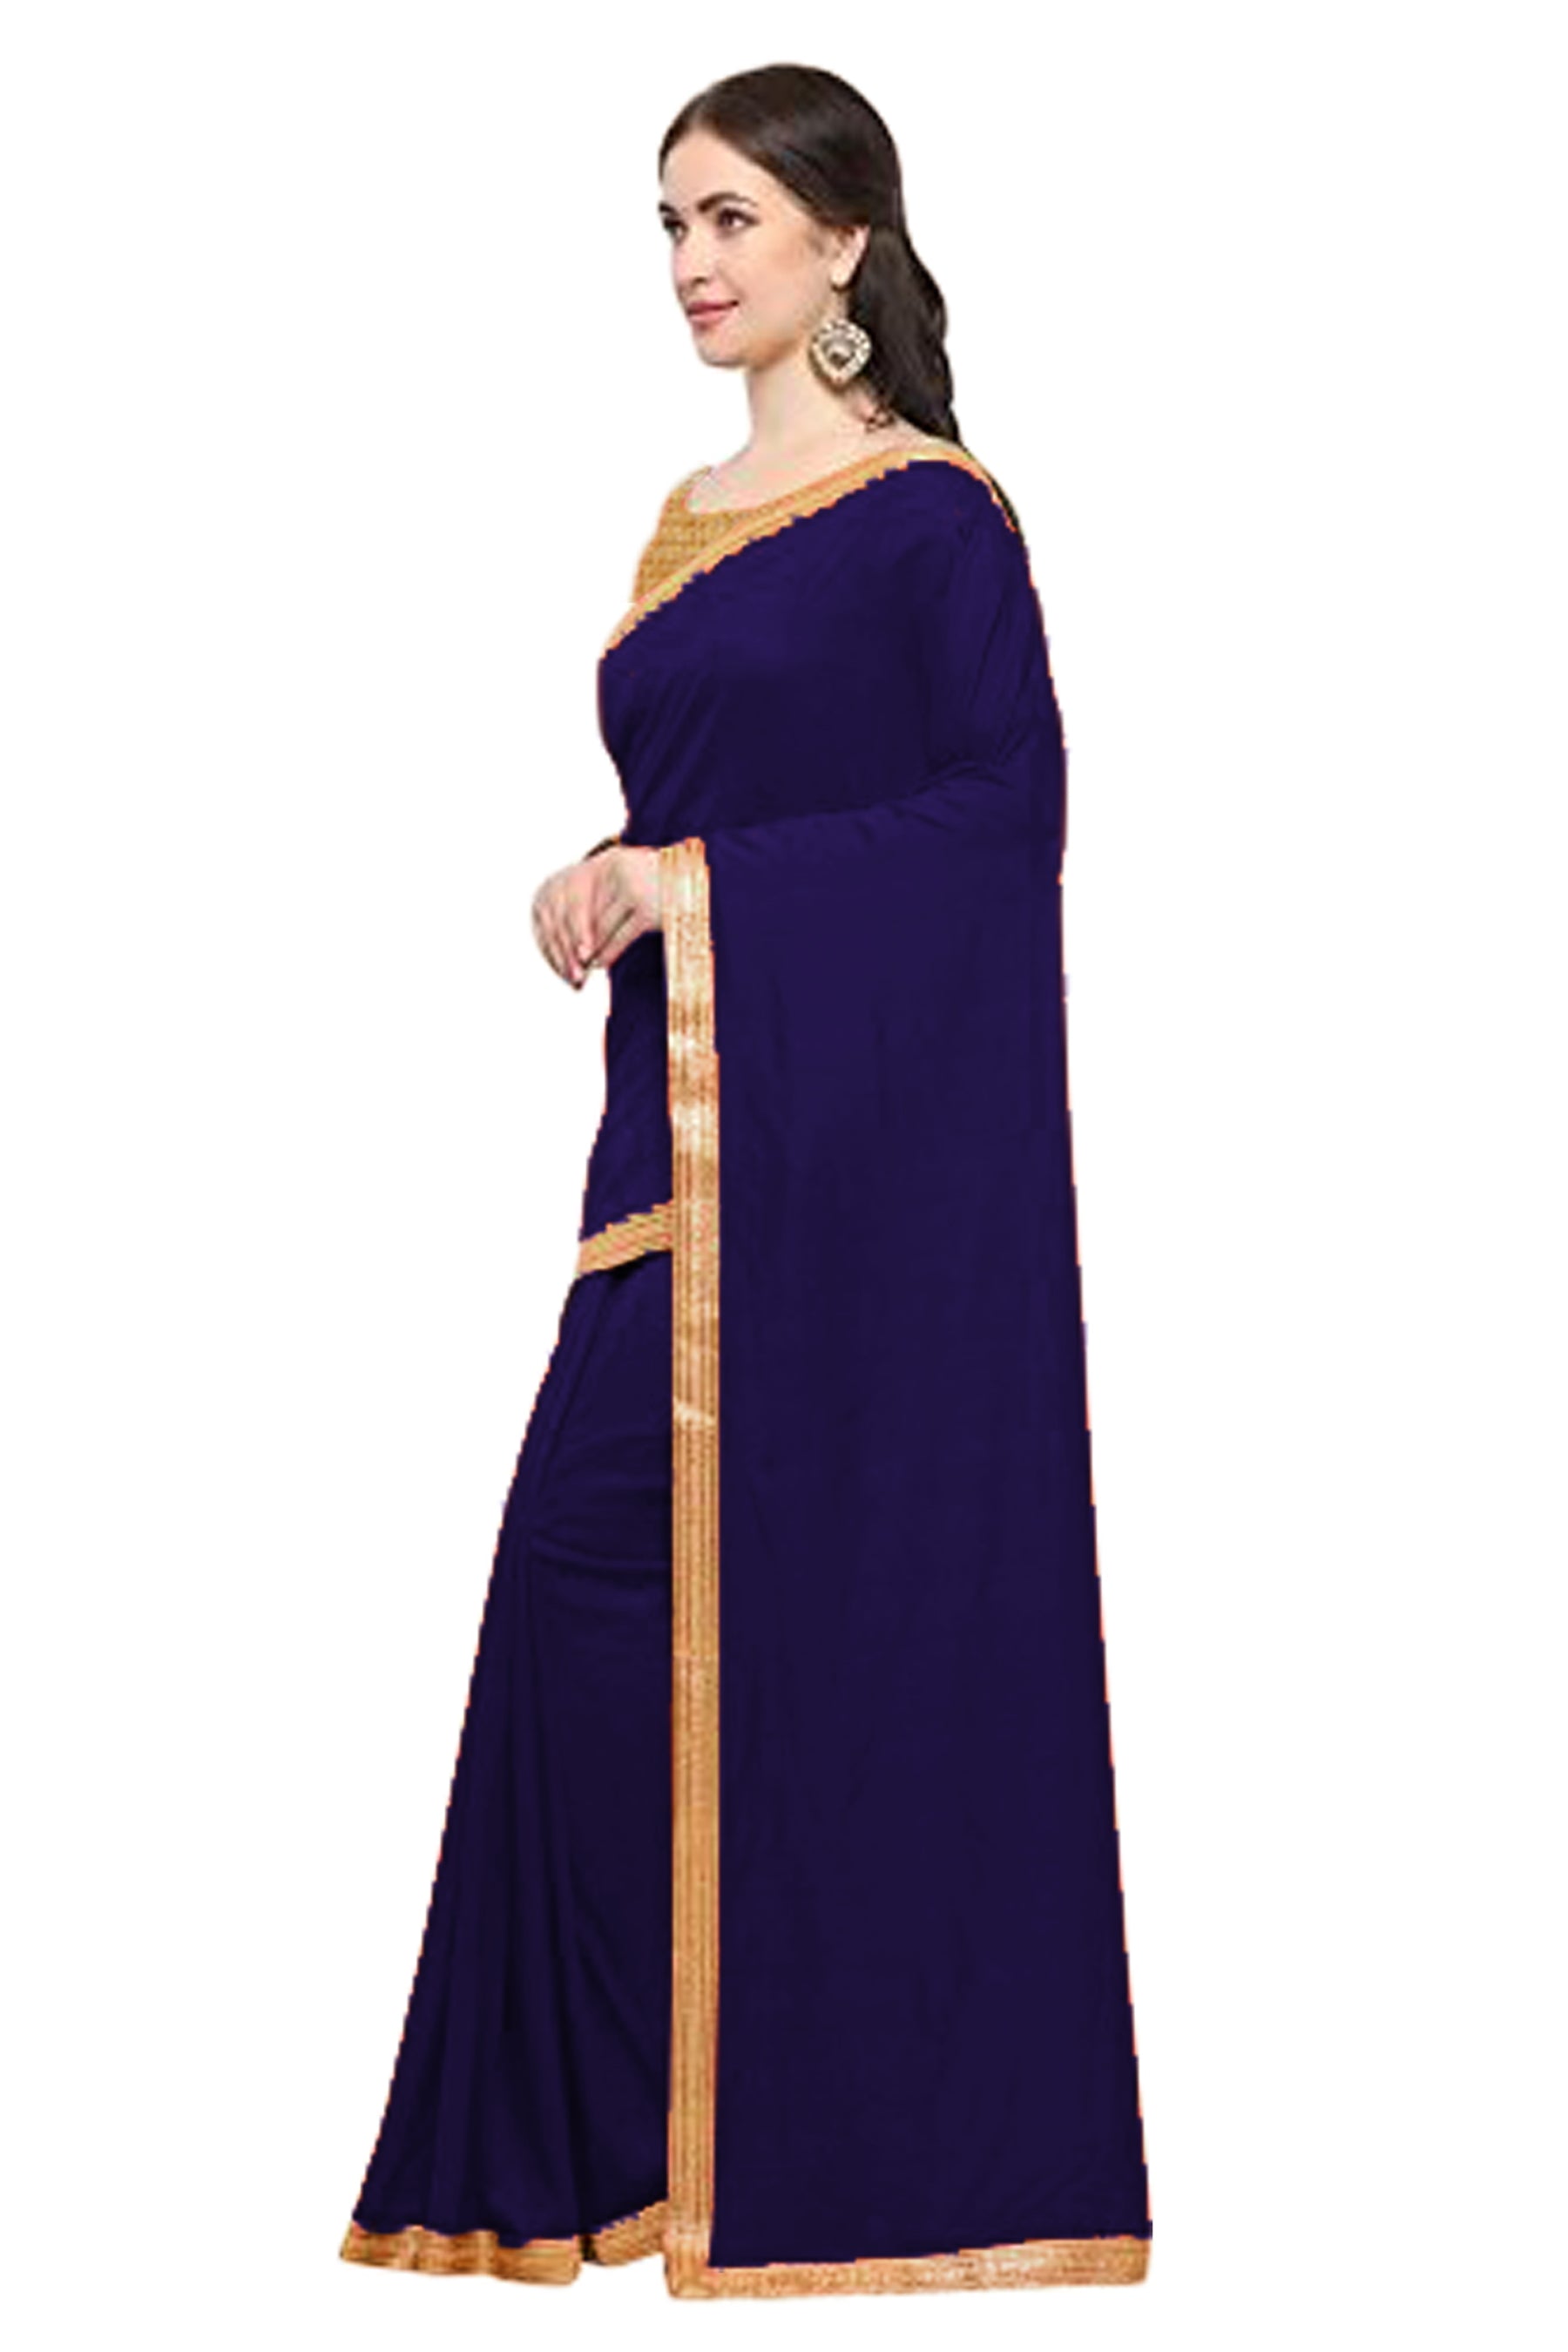 Women's self Woven Solid Occasion Wear Georgette Heavy Border Sari With Blouse Piece (Blue) - NIMIDHYA